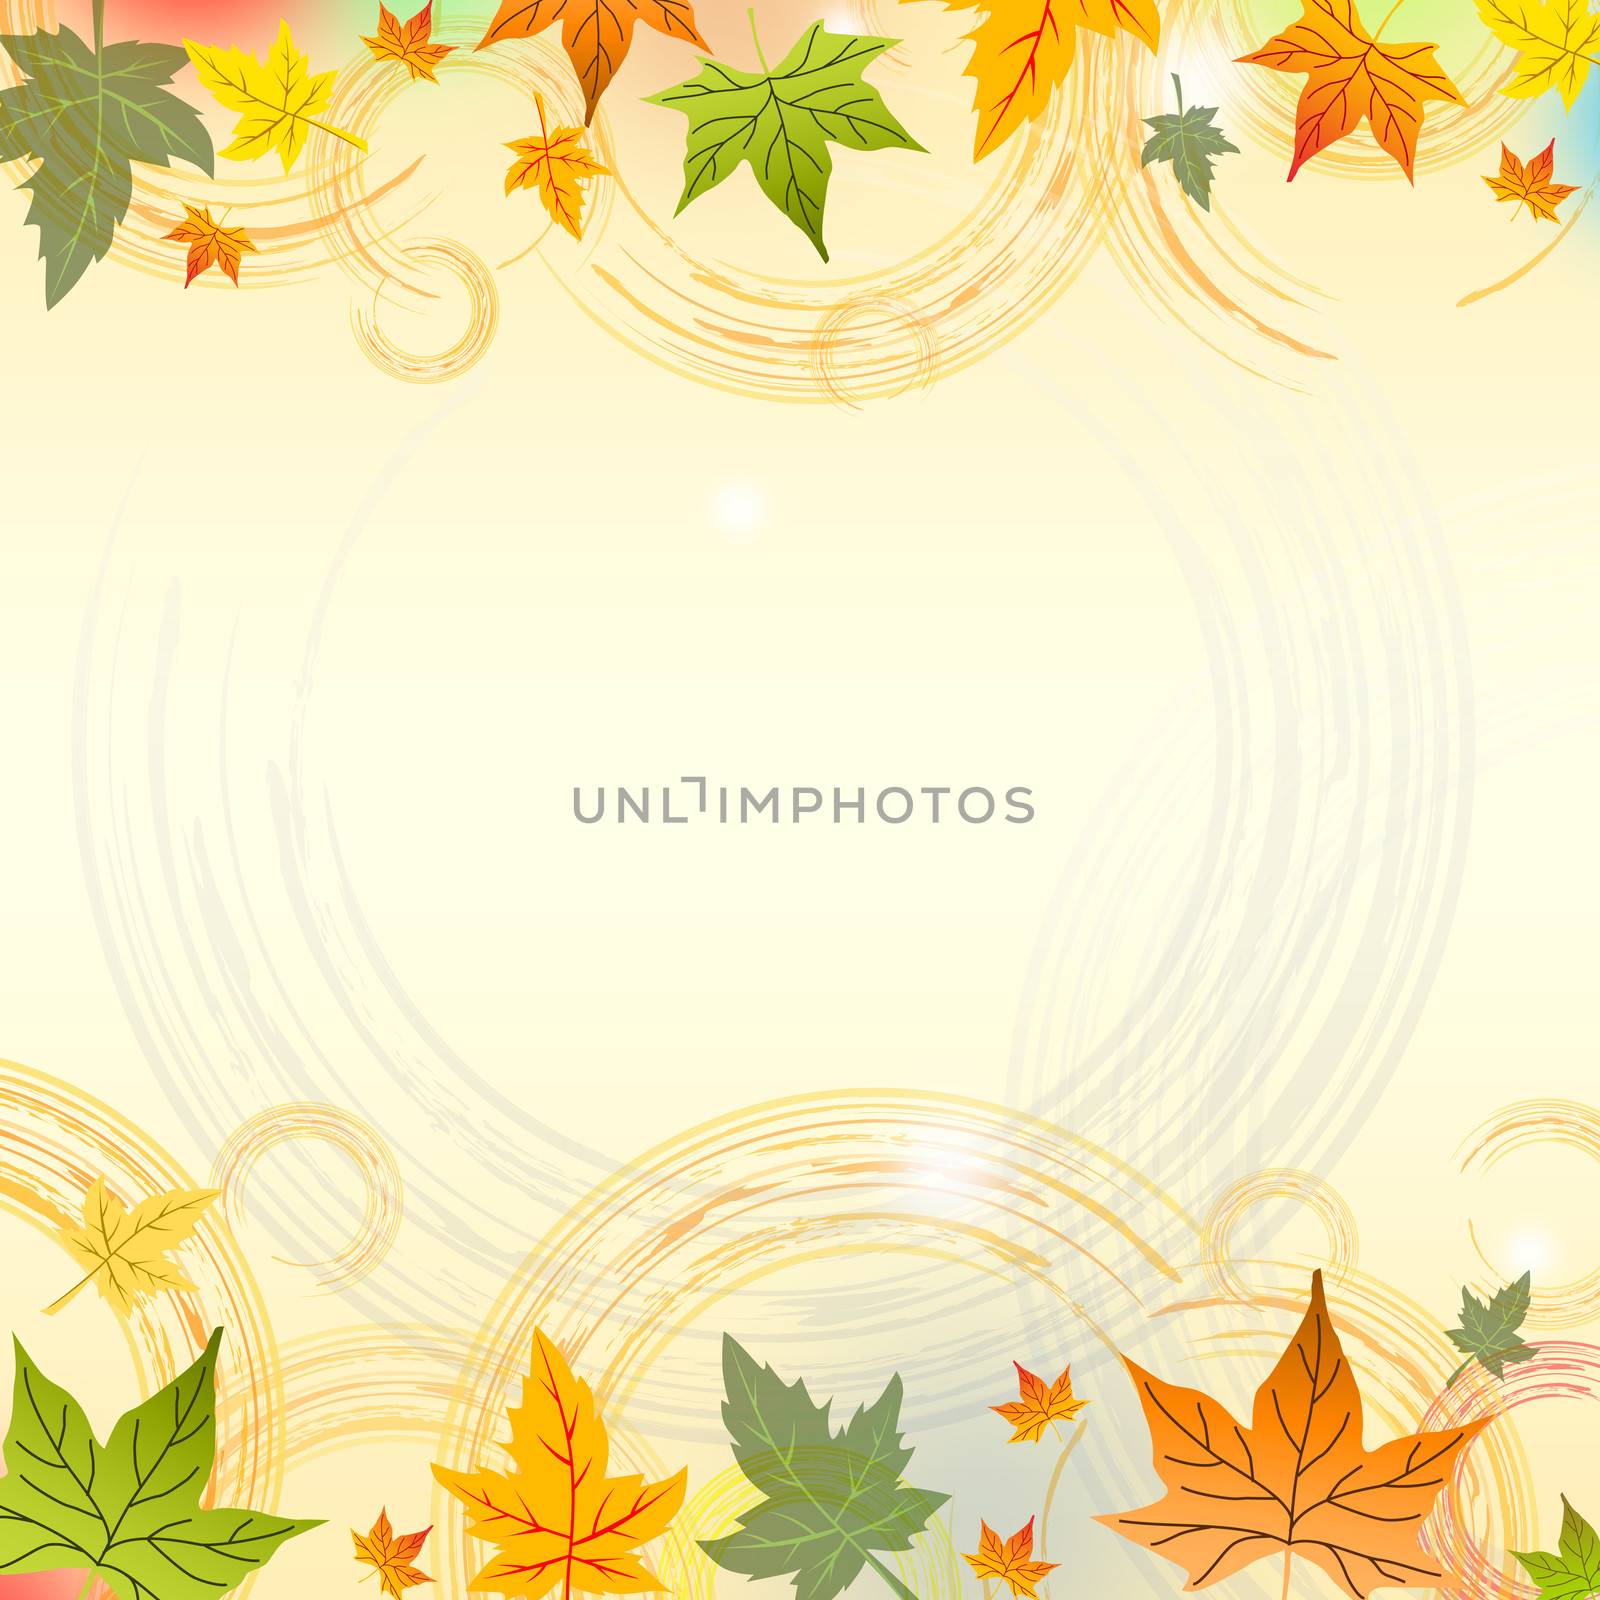 background with illustrated autumn leaves with abstract circles